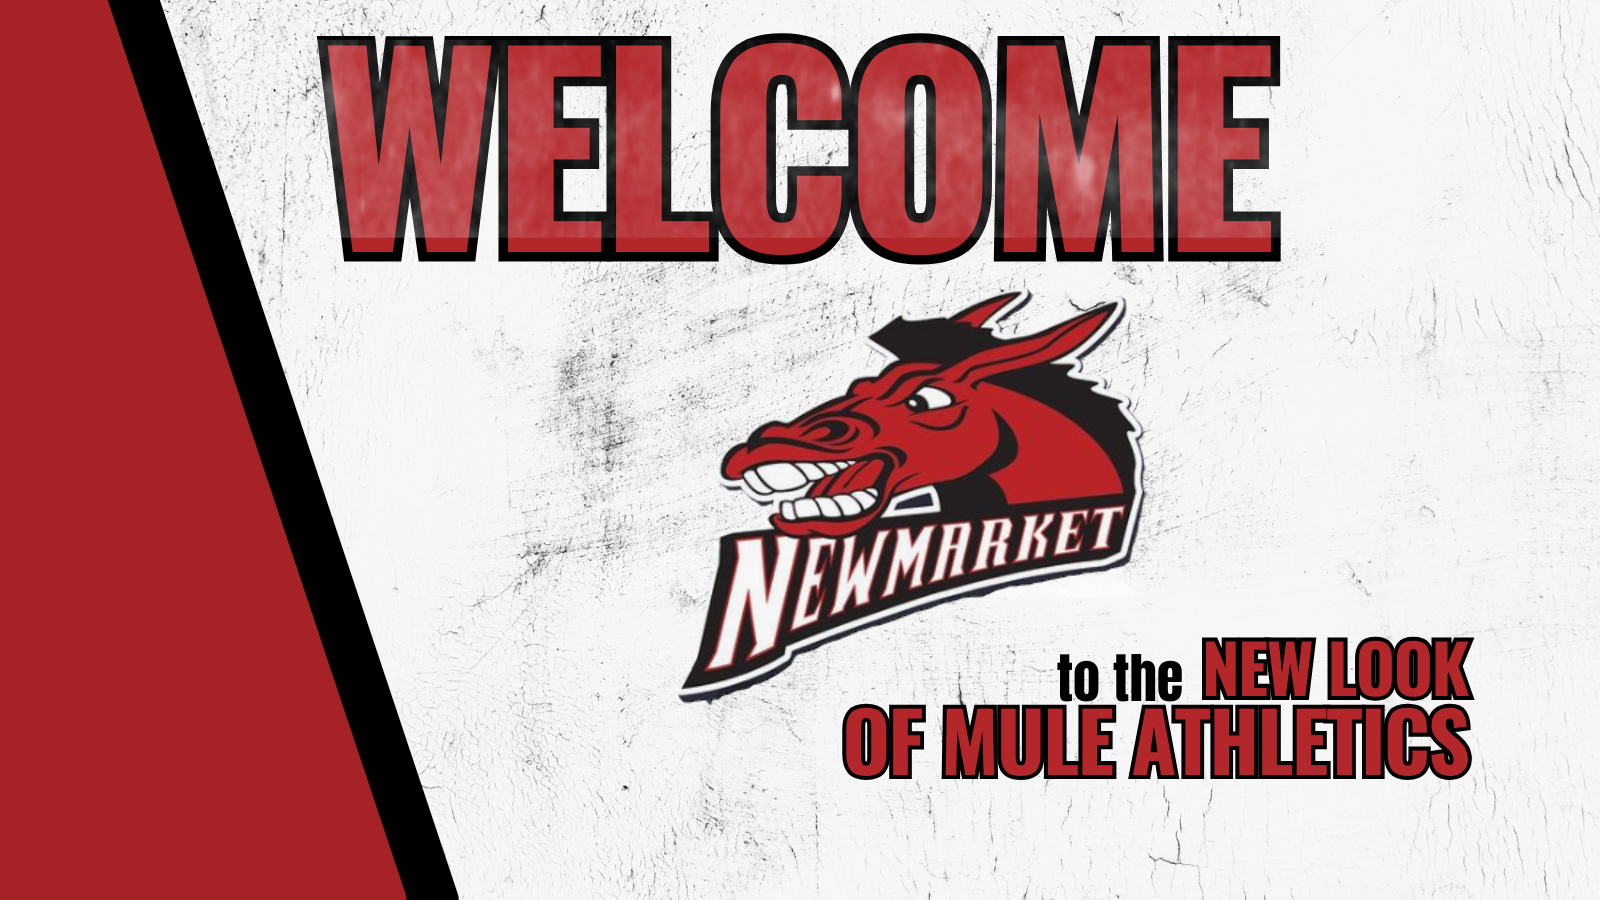 1709846228_CopyofOleyValleyWelcometo1280x320pxTwitterPost3.png - Image for 🎉 Exciting News for Mule Athletics Fans! 🎉